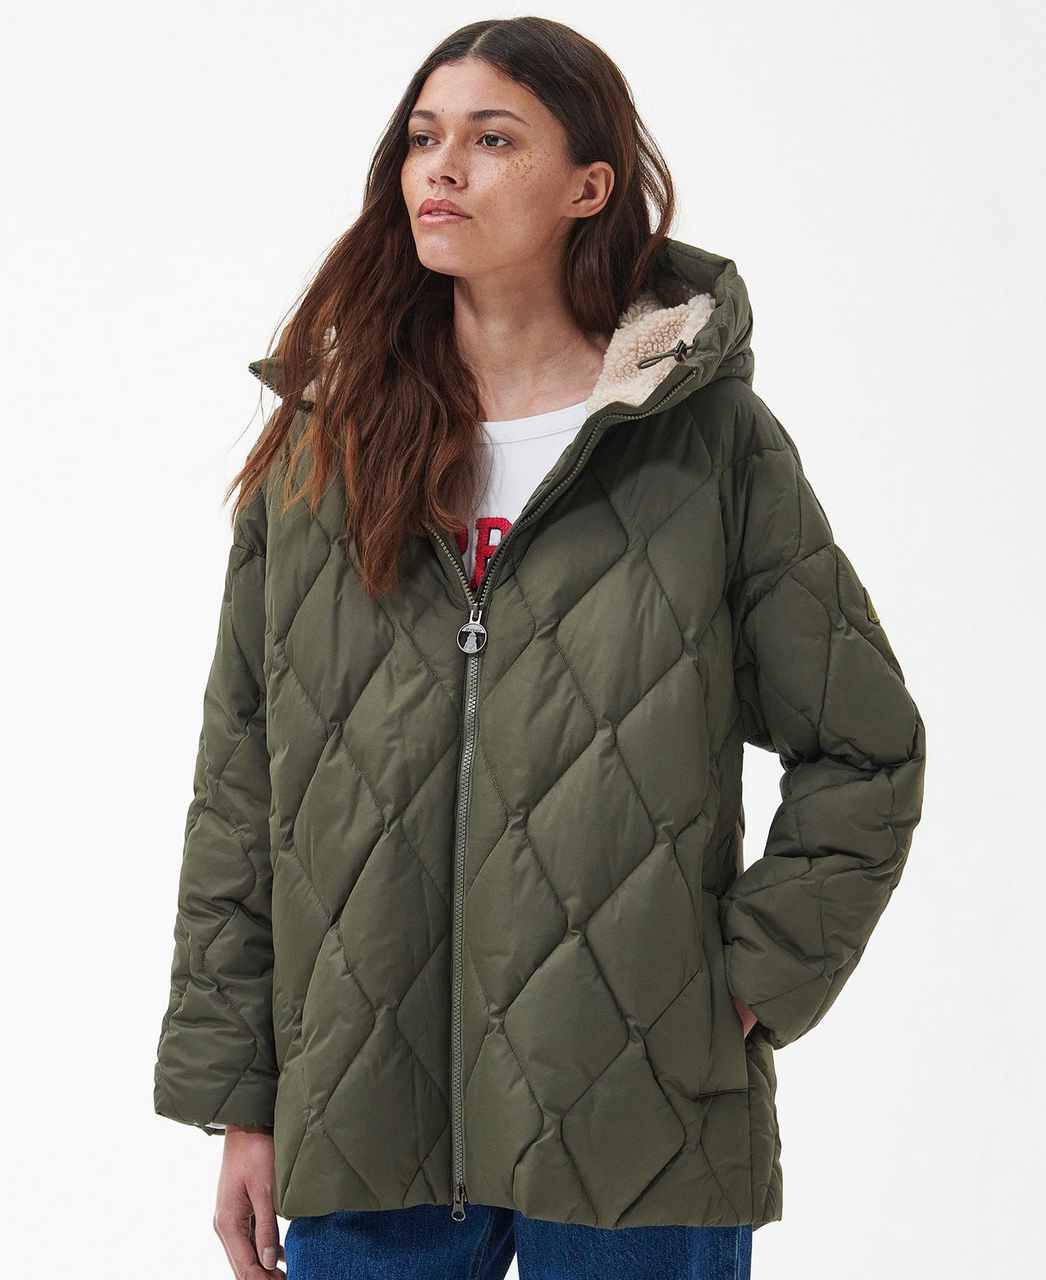 Quilted jacket with a hood - olive